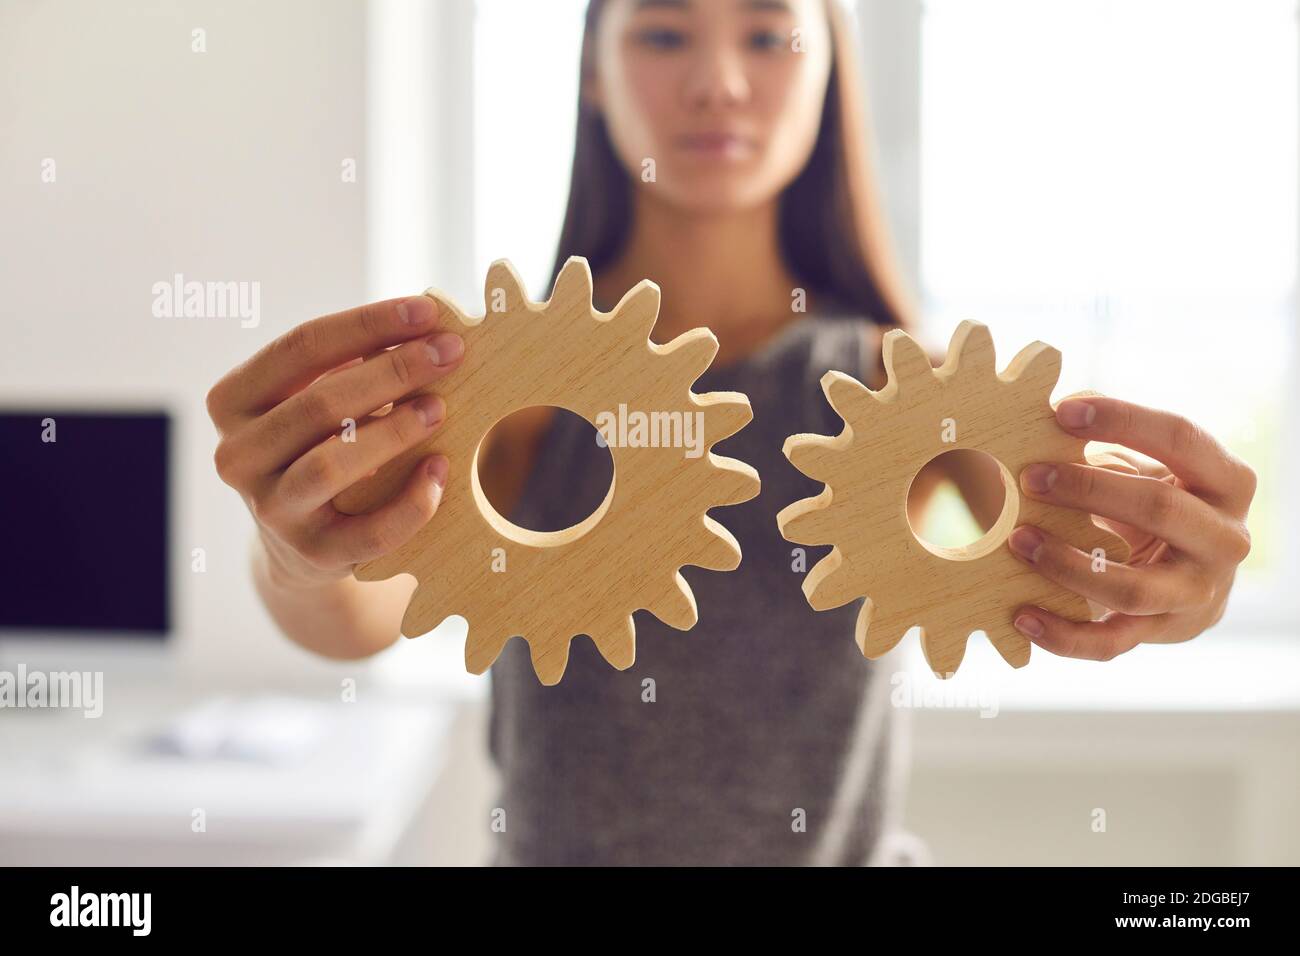 Woman joining cogwheels as metaphor for finding business solutions, integration and cooperation Stock Photo